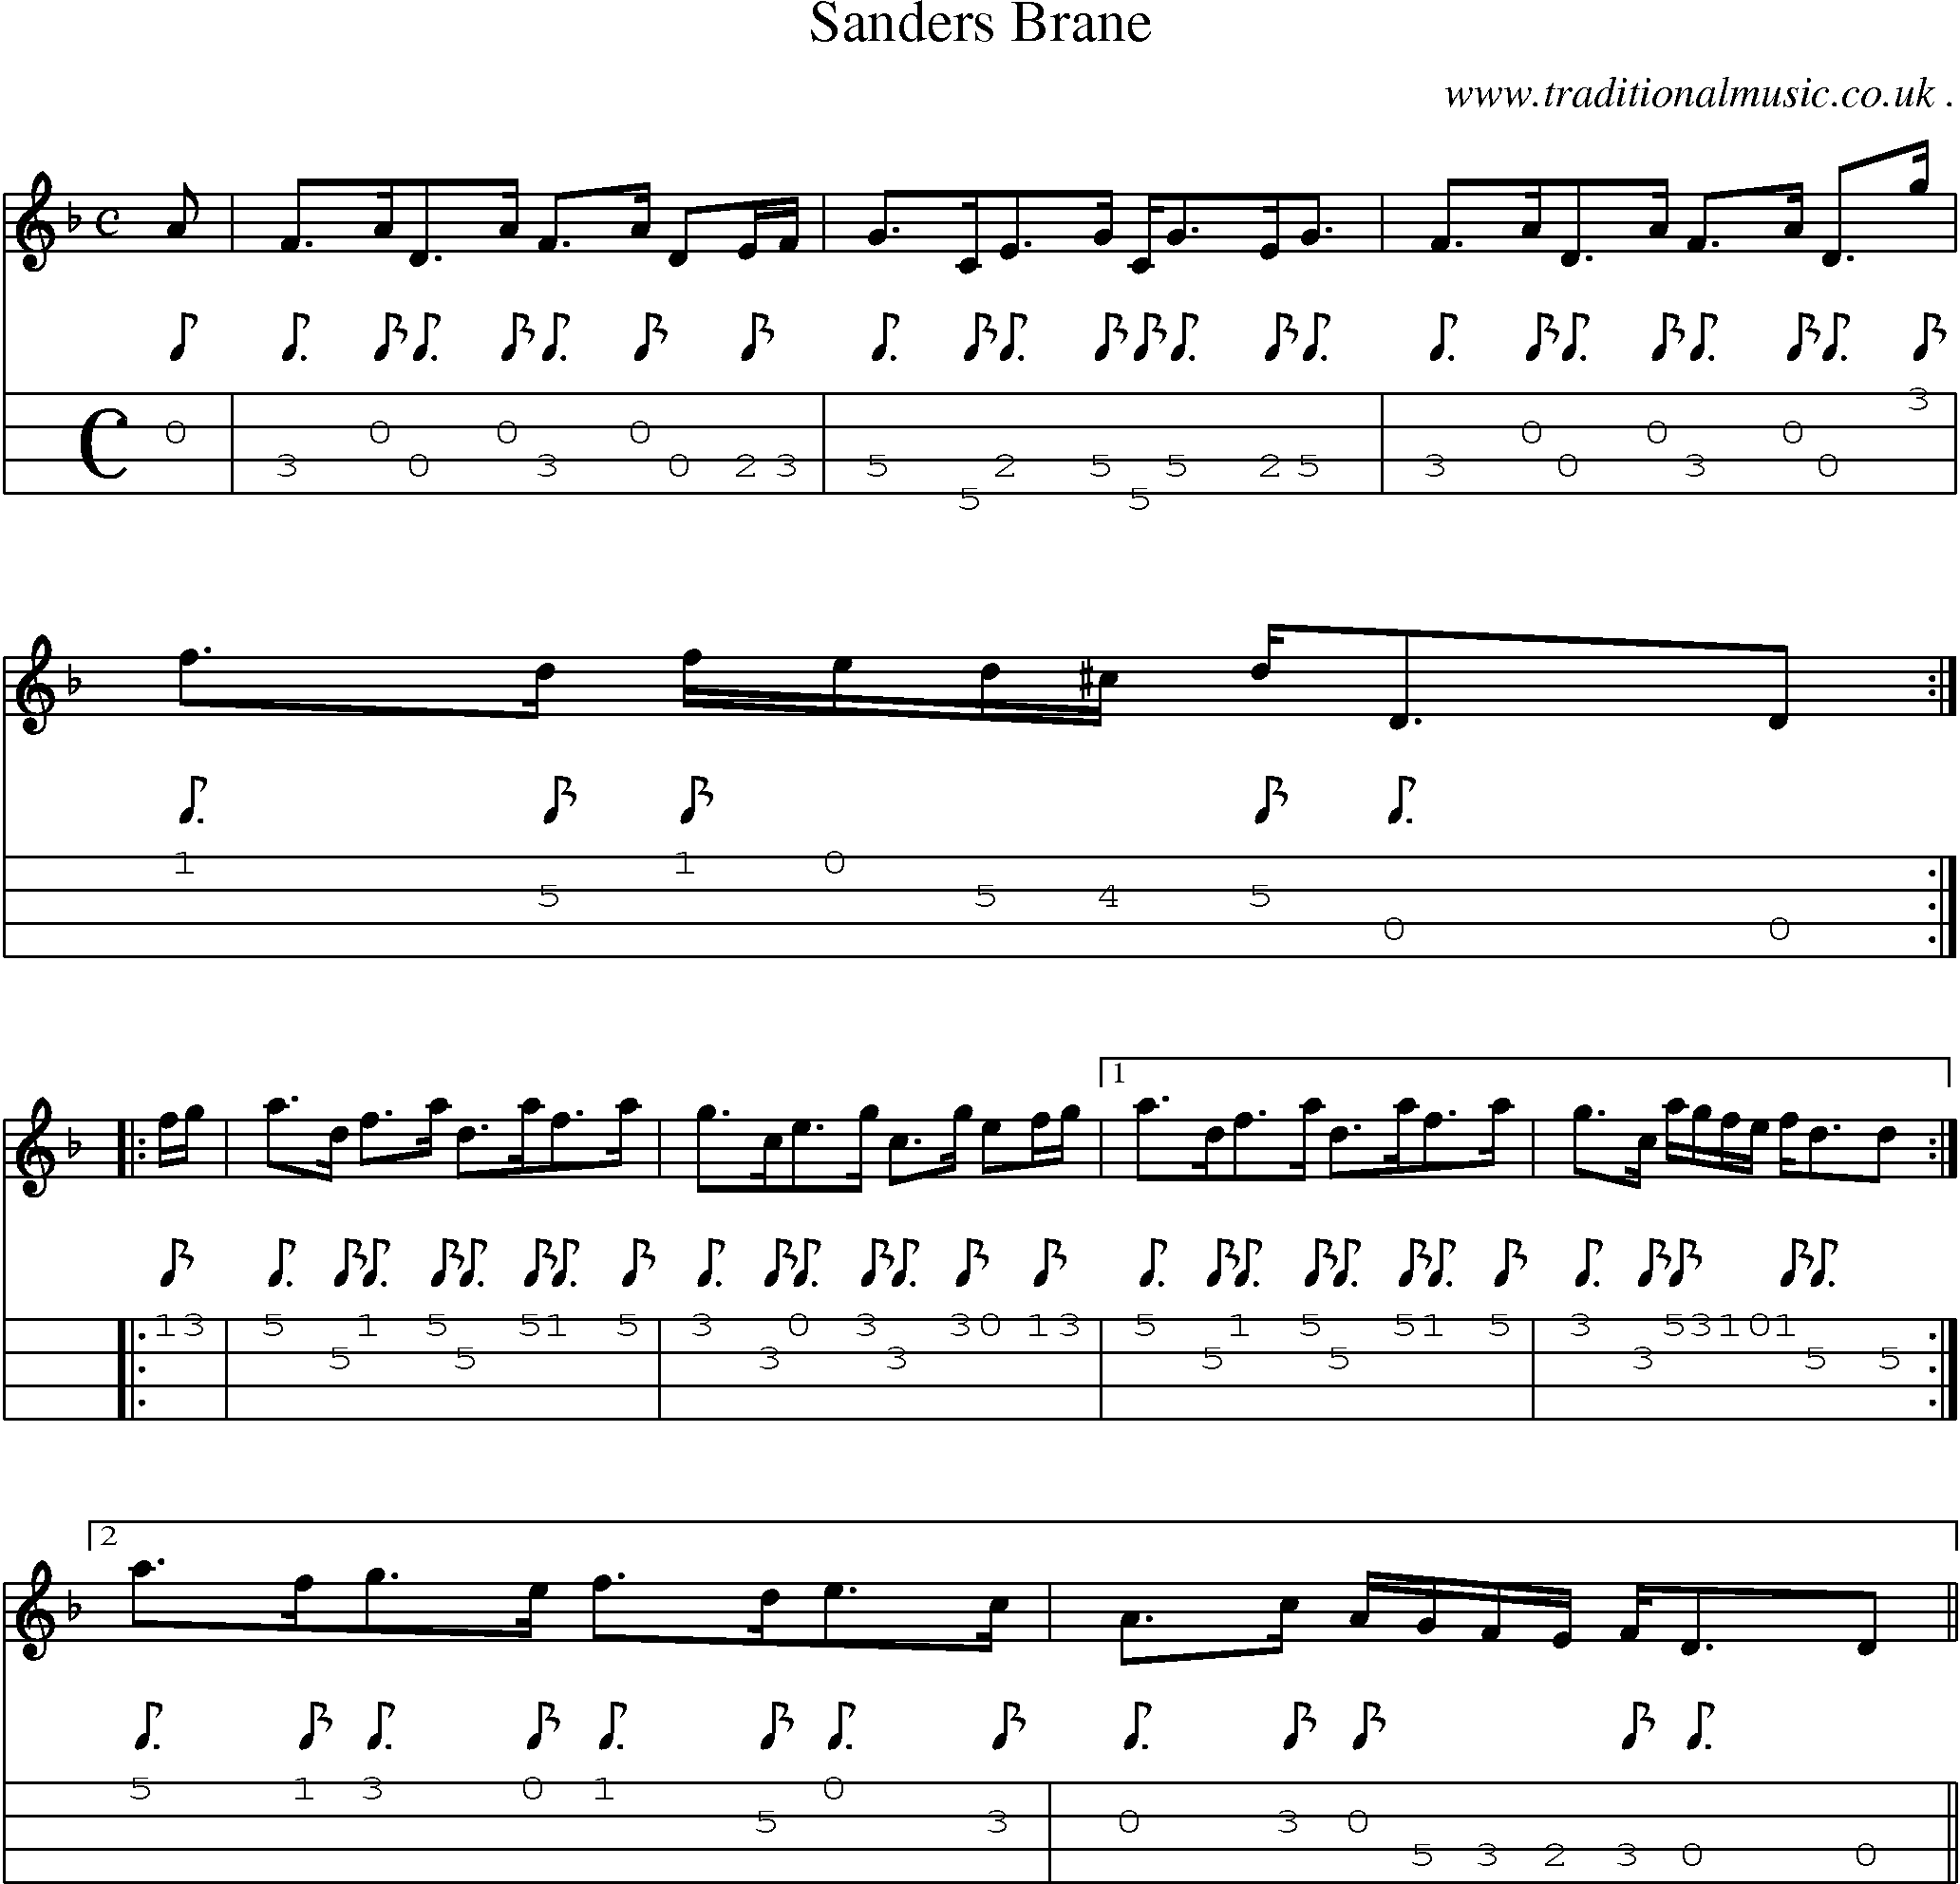 Sheet-music  score, Chords and Mandolin Tabs for Sanders Brane